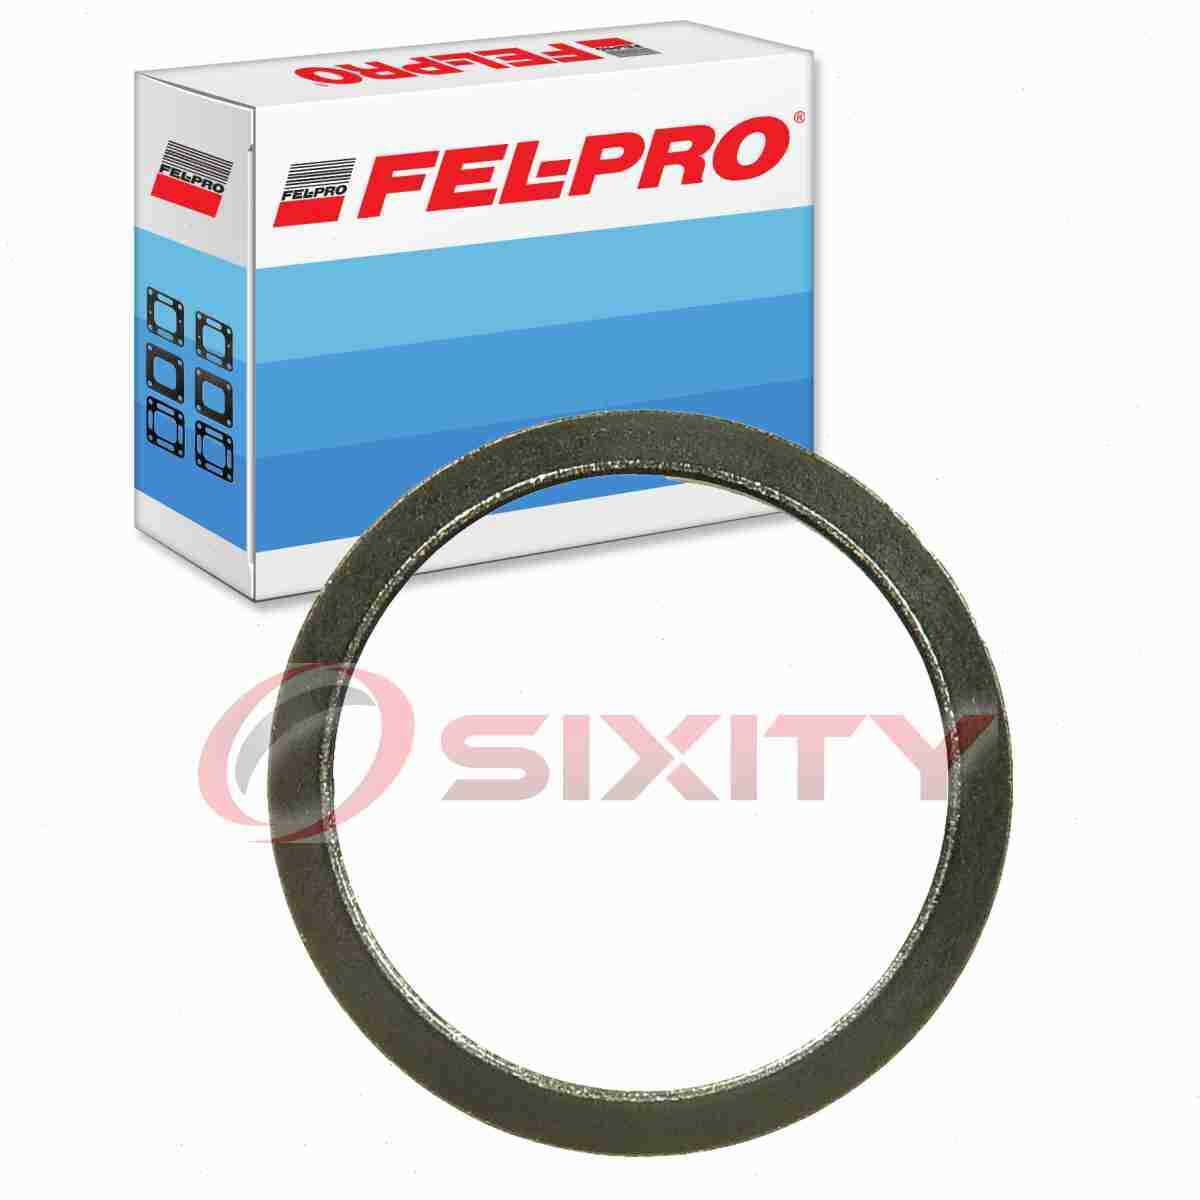 Fel-Pro Exhaust Pipe Flange Gasket for 1978-1979 Oldsmobile Cutlass 5.7L V8 gy